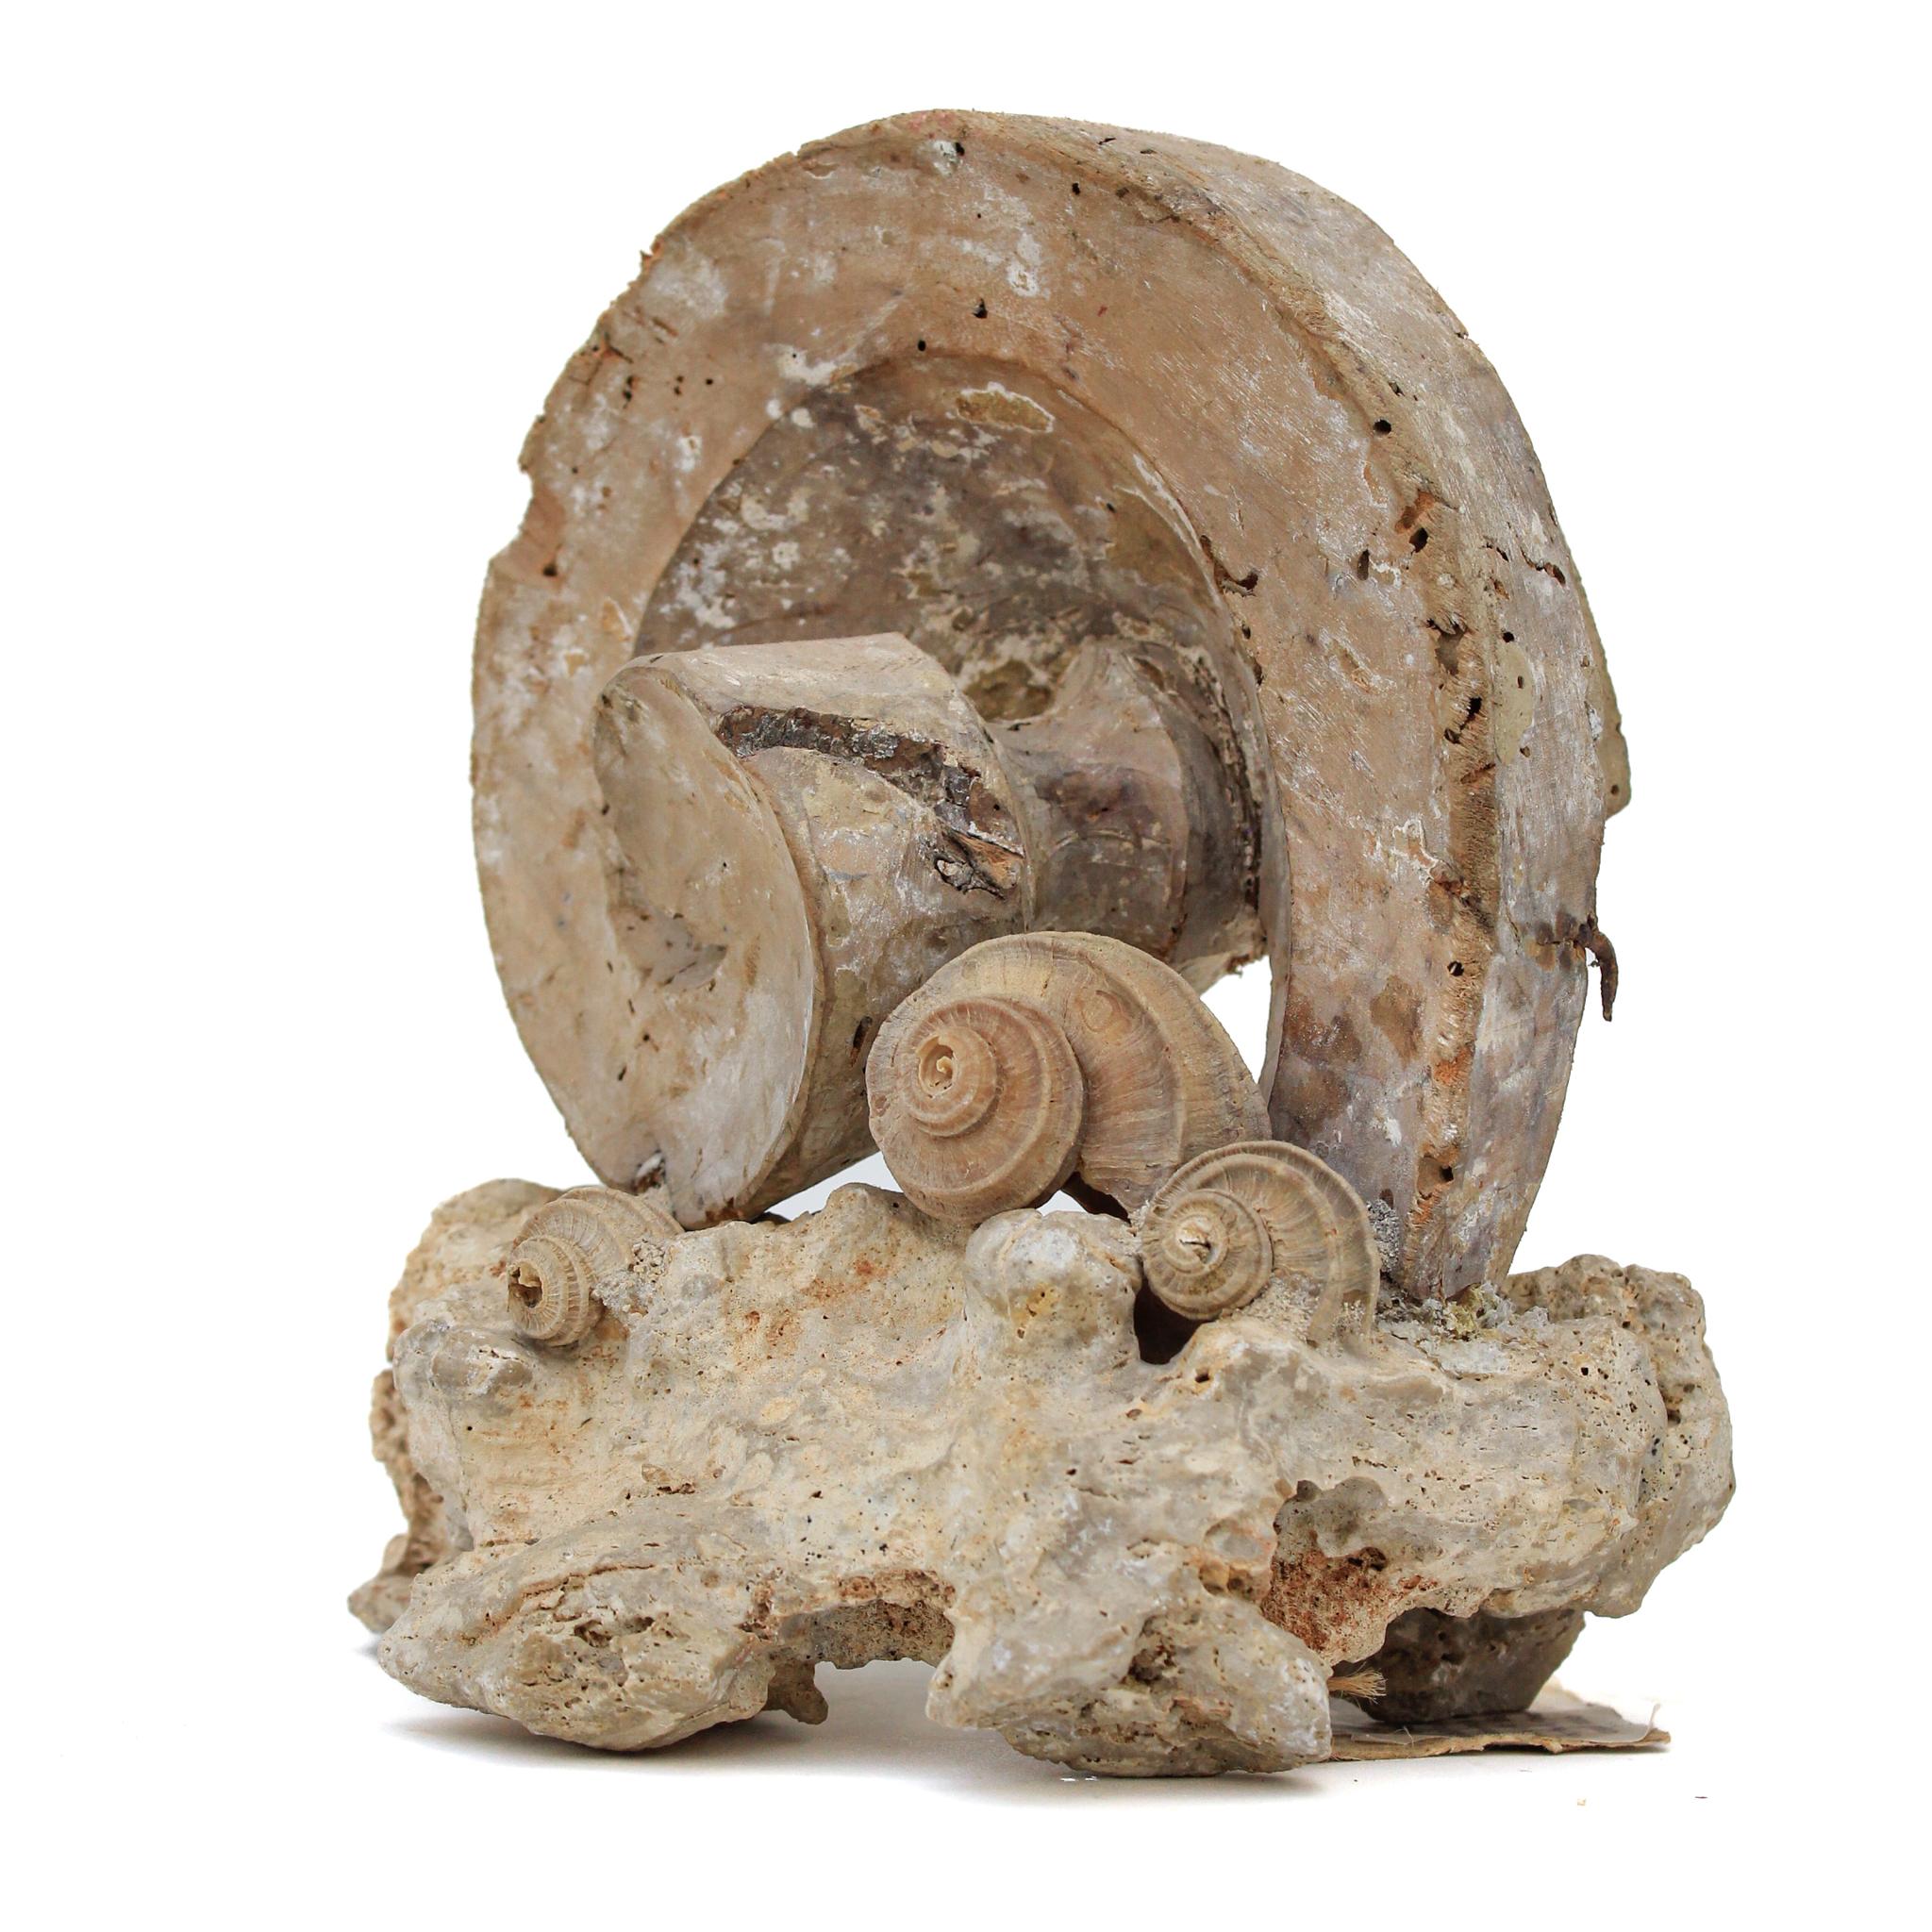 17th century Italian scroll fragment with fossil shells (ecphora) and mounted on a rock coral base.

This fragment is from a church in Florence. It was found and saved from the historic flooding of the Arno River in 1966. The rare fossil shells